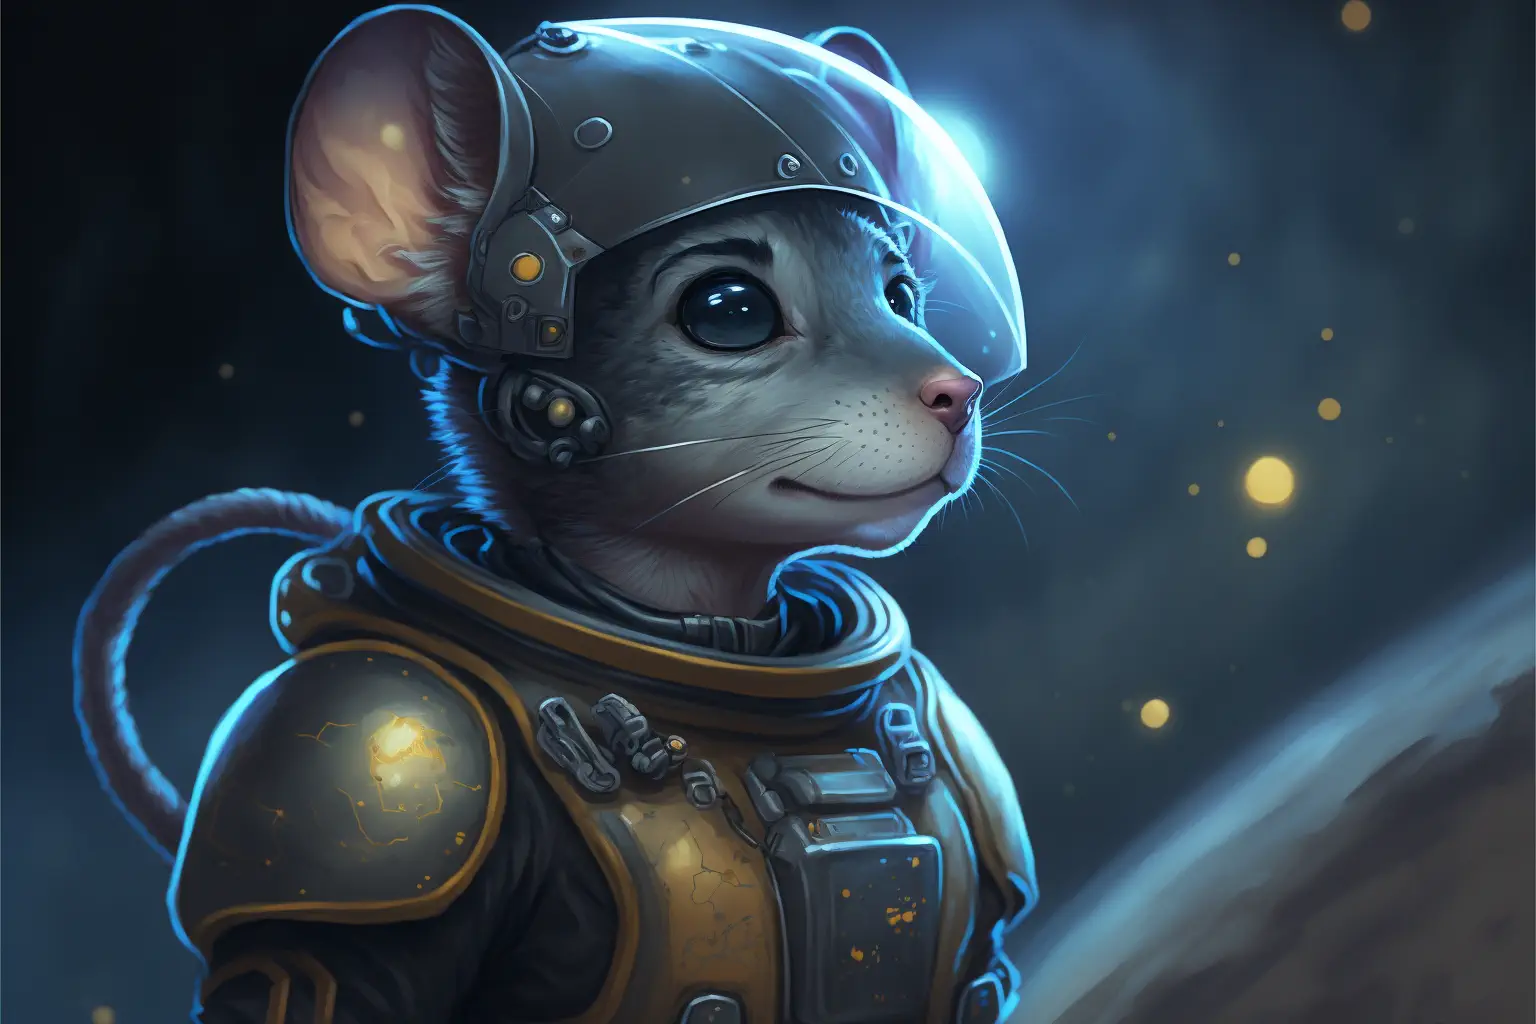 Drakosha_grey_female_mouse_in_armored_suit_looking_at_the_stars_3eedade4-fd94-4db8-a2ff-0fd19ce2782e